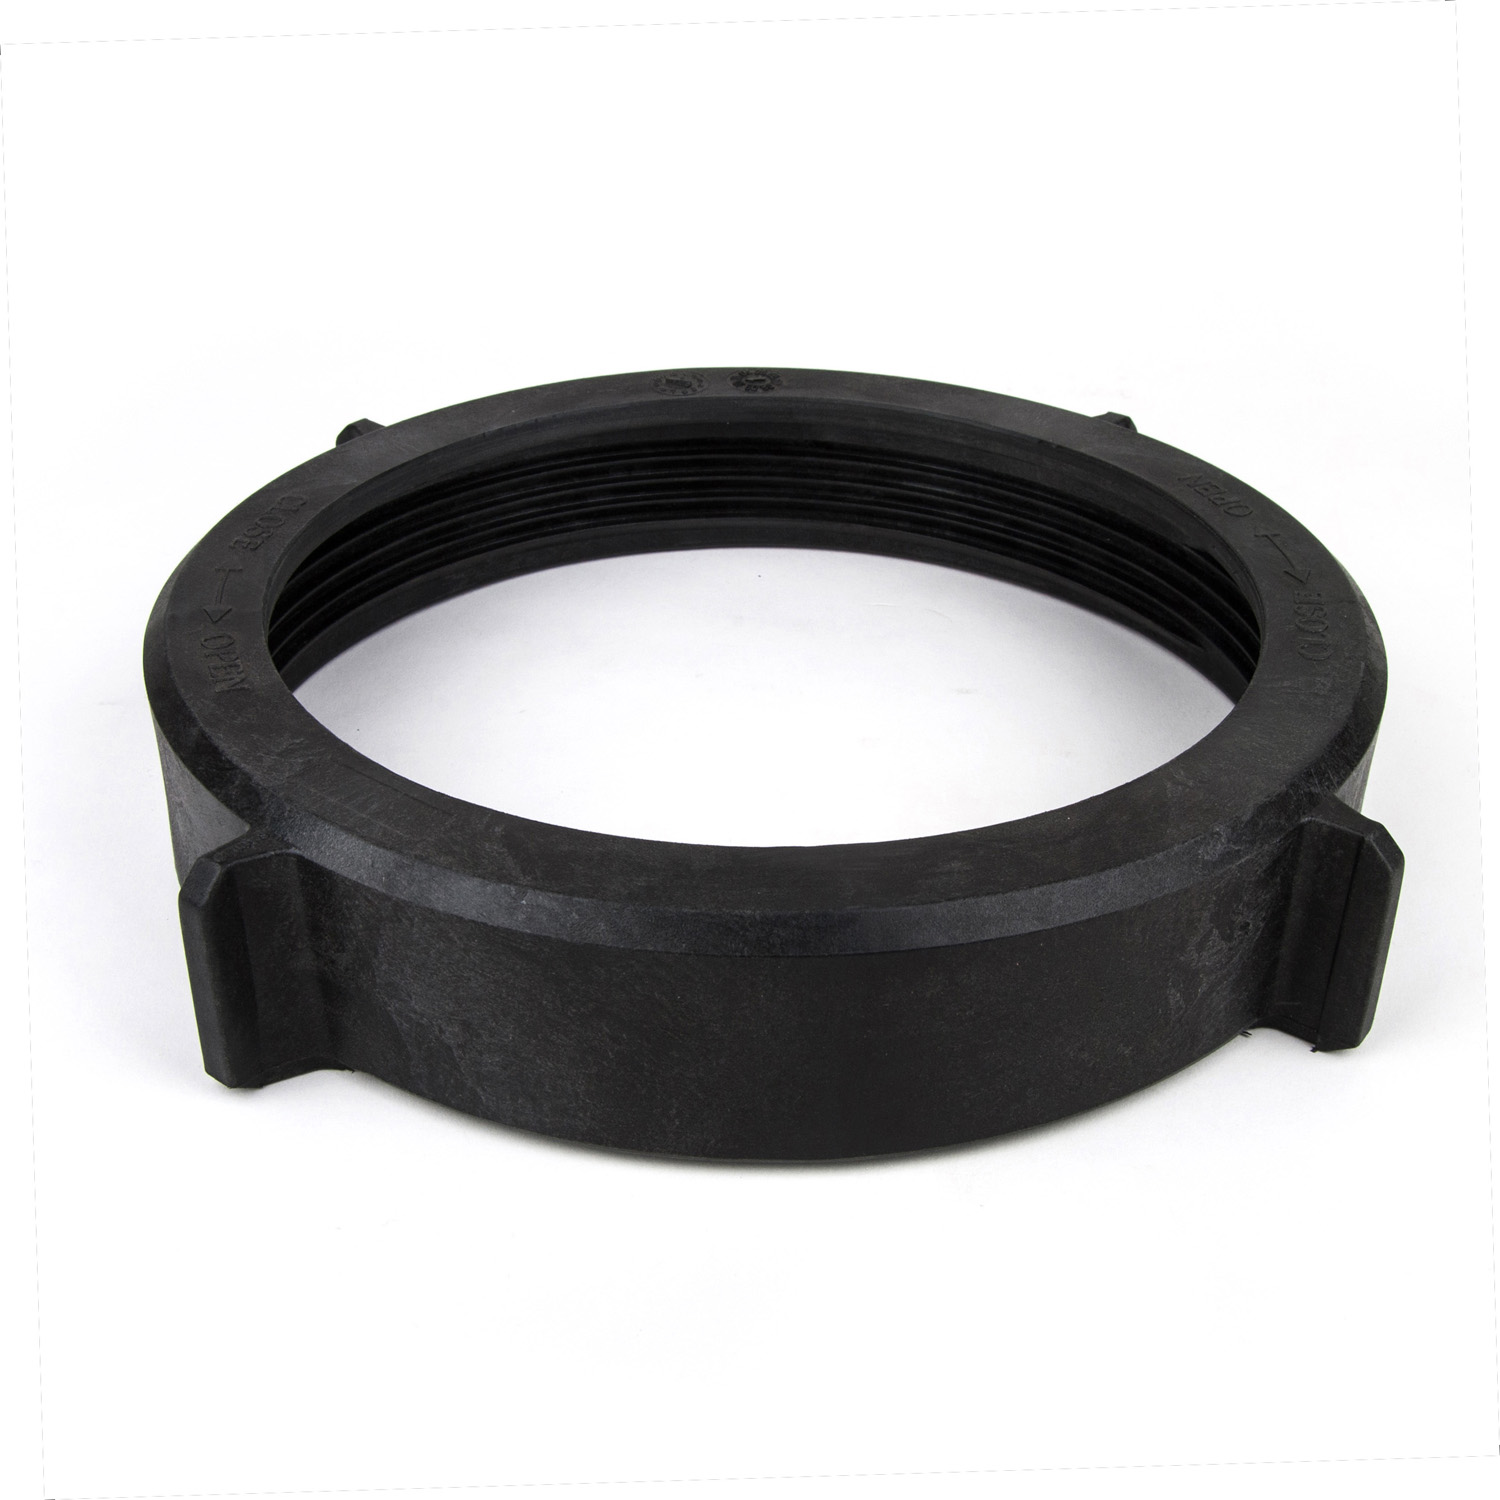 07620301WA-03 Filter clamp, CPF/OWS